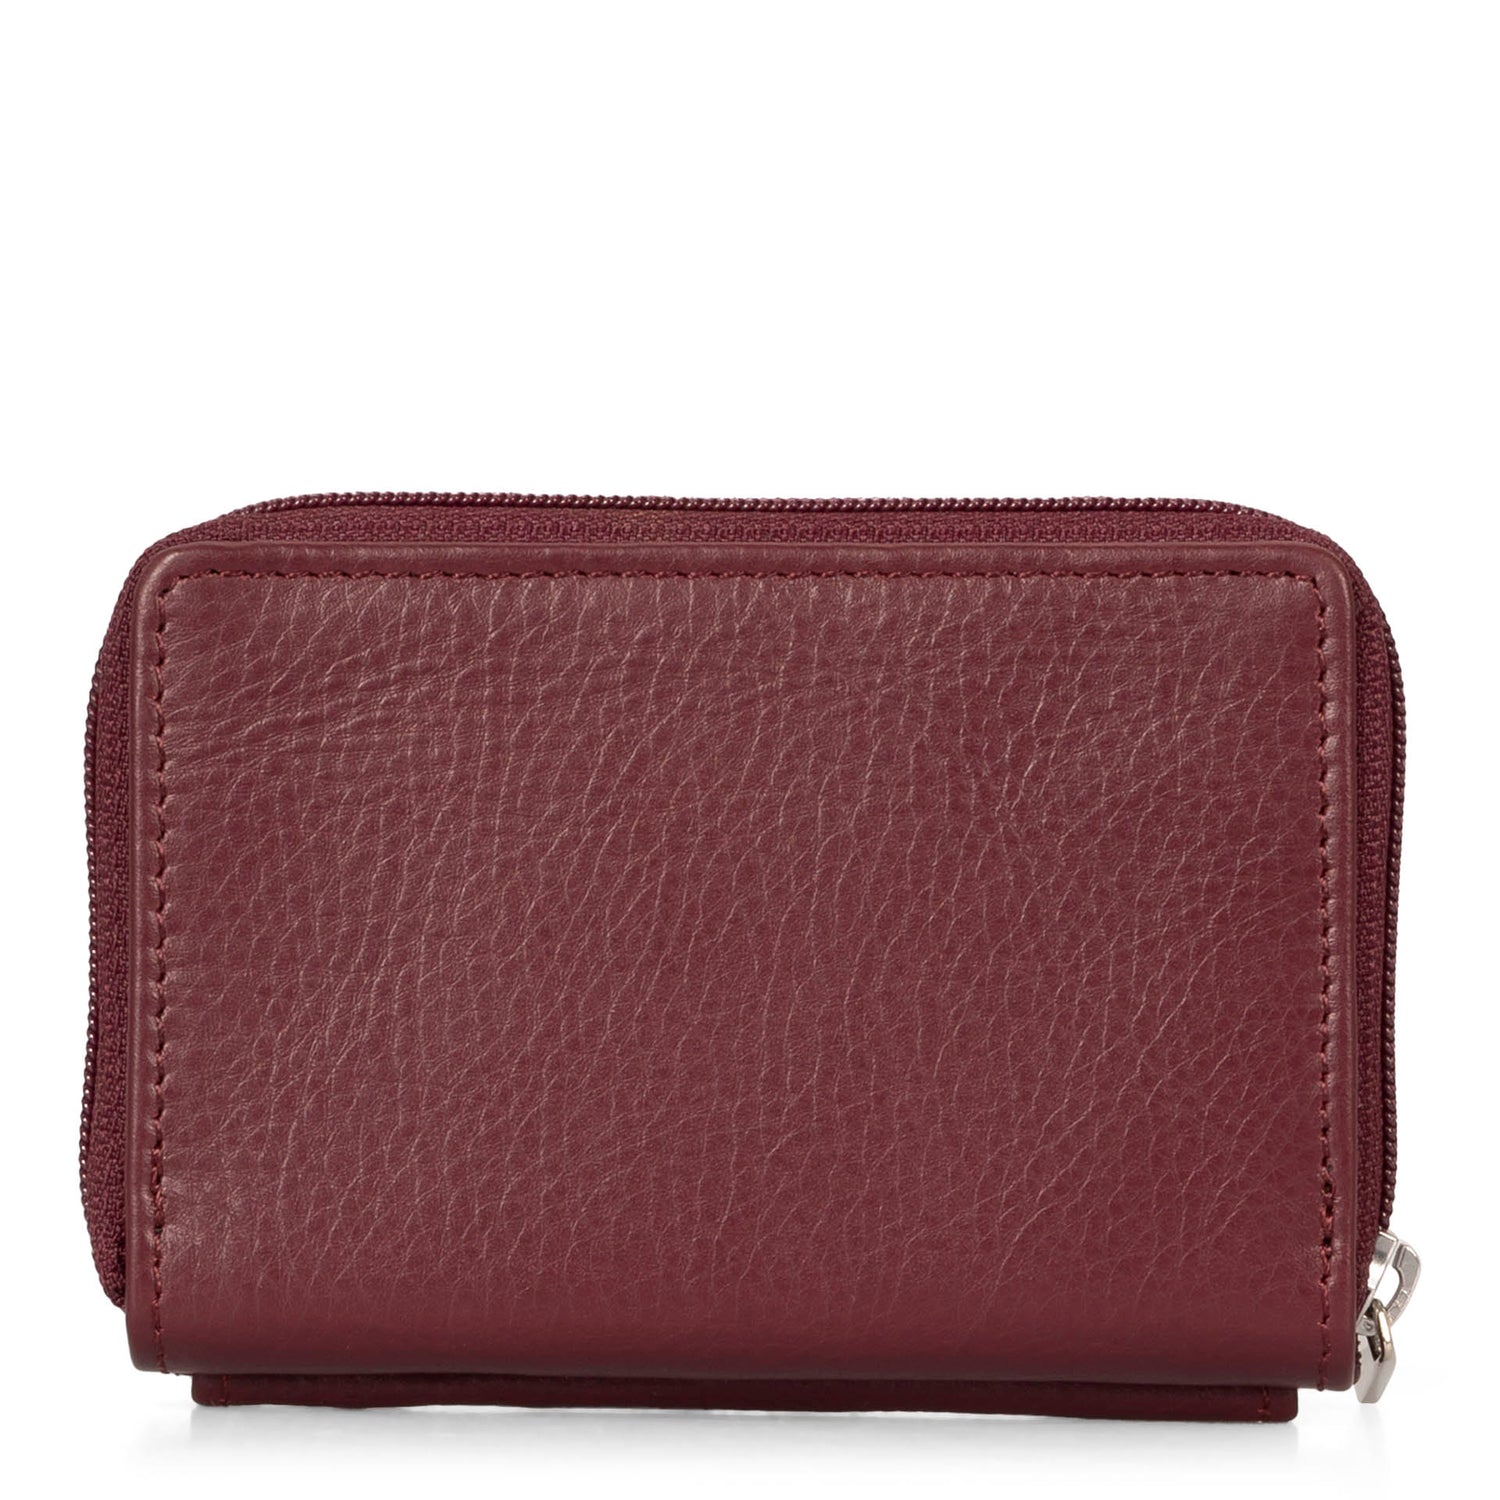 Back side of a burgundy card holder called basics by tracker, showing its soft leather texture.